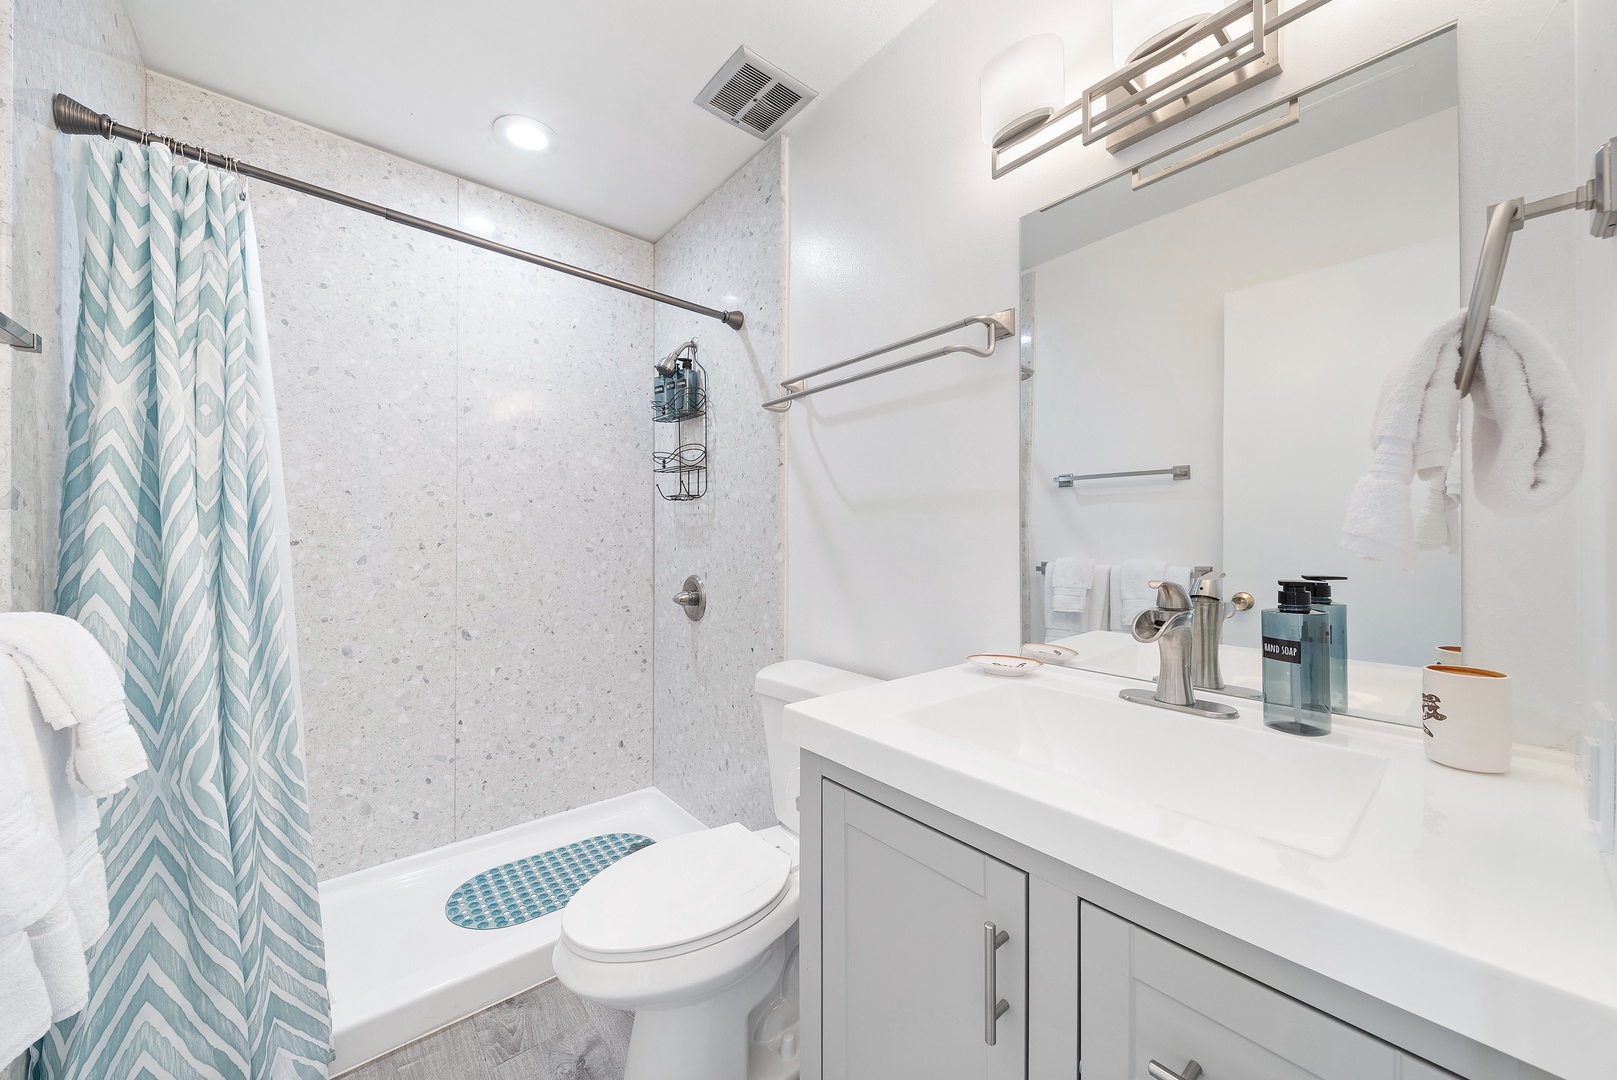 Kahuku Vacation Rentals, Kuilima Estates West #85 - Full size shower in upstairs bathroom.